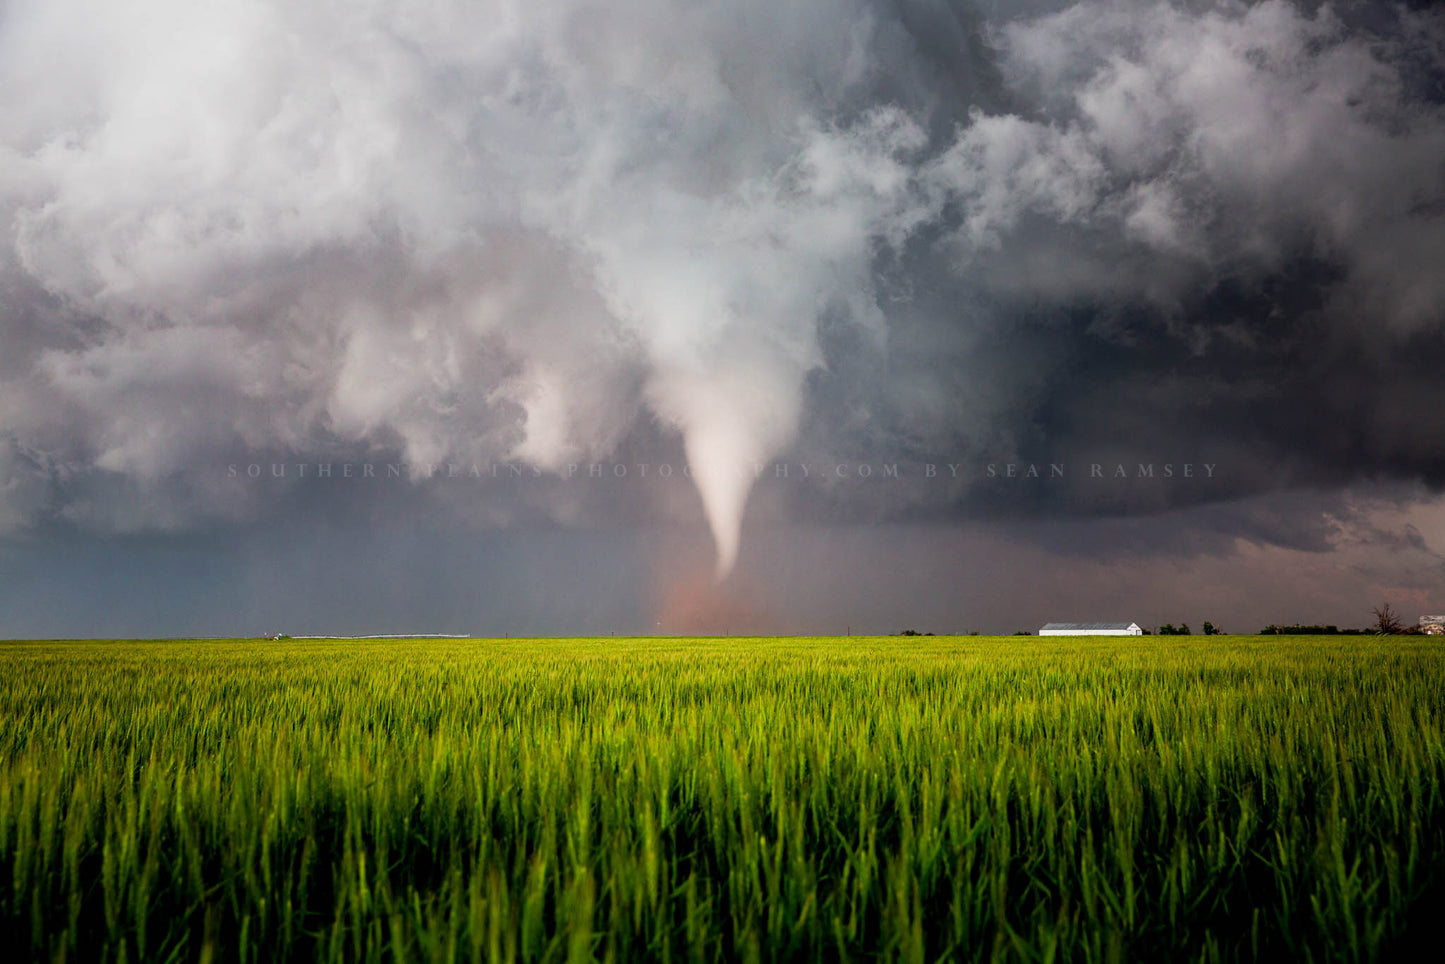 Storm photography print of a large white tornado over a green wheat field on a stormy spring day in Texas by Sean Ramsey of Southern Plains Photography.